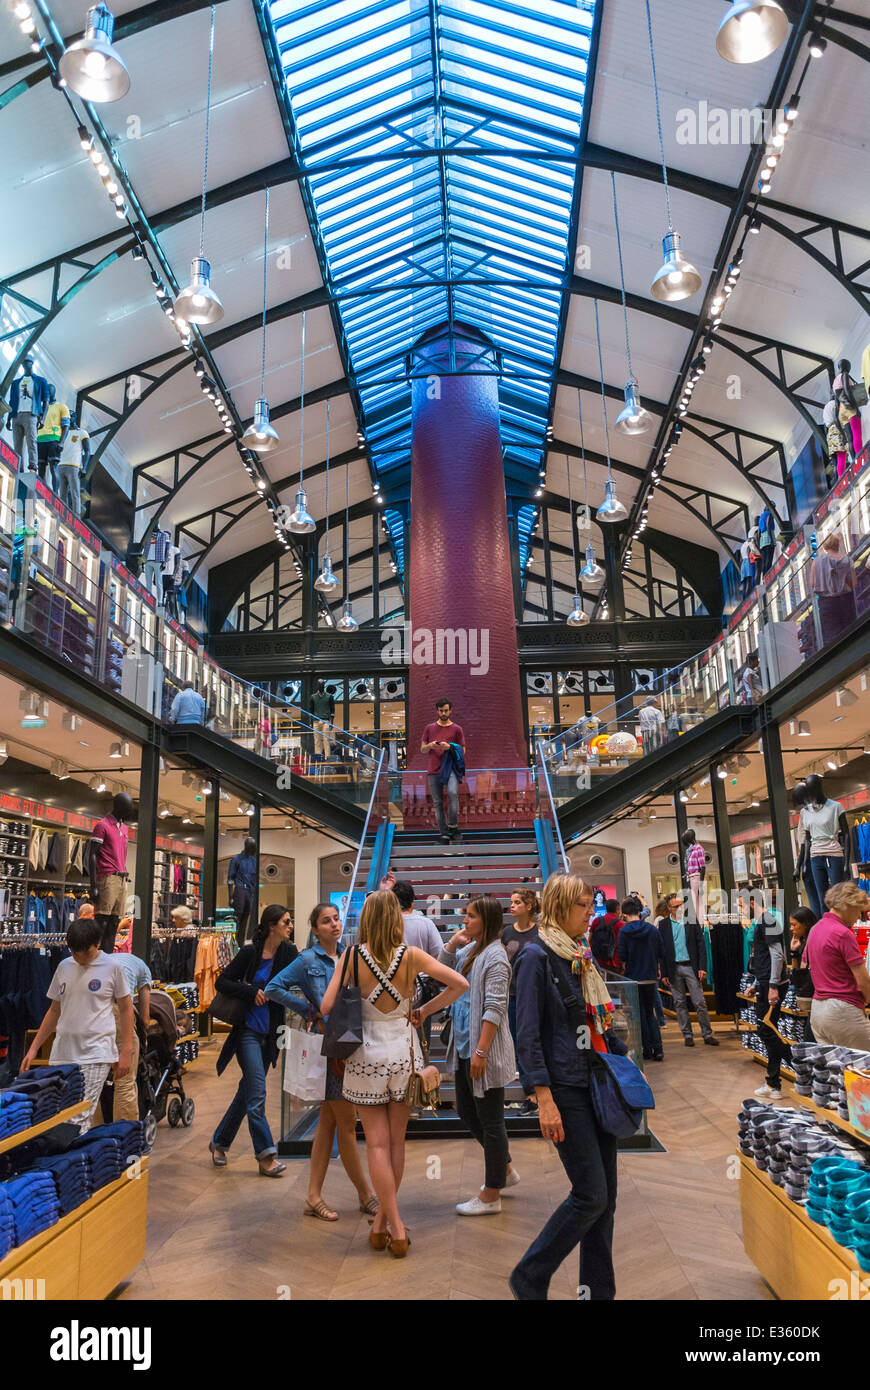 Paris, France, People Shopping in Clothing Store, "Uniqlo Le Marais",  Converted Factory Building, commercial interiors, fast fashion Stock Photo  - Alamy